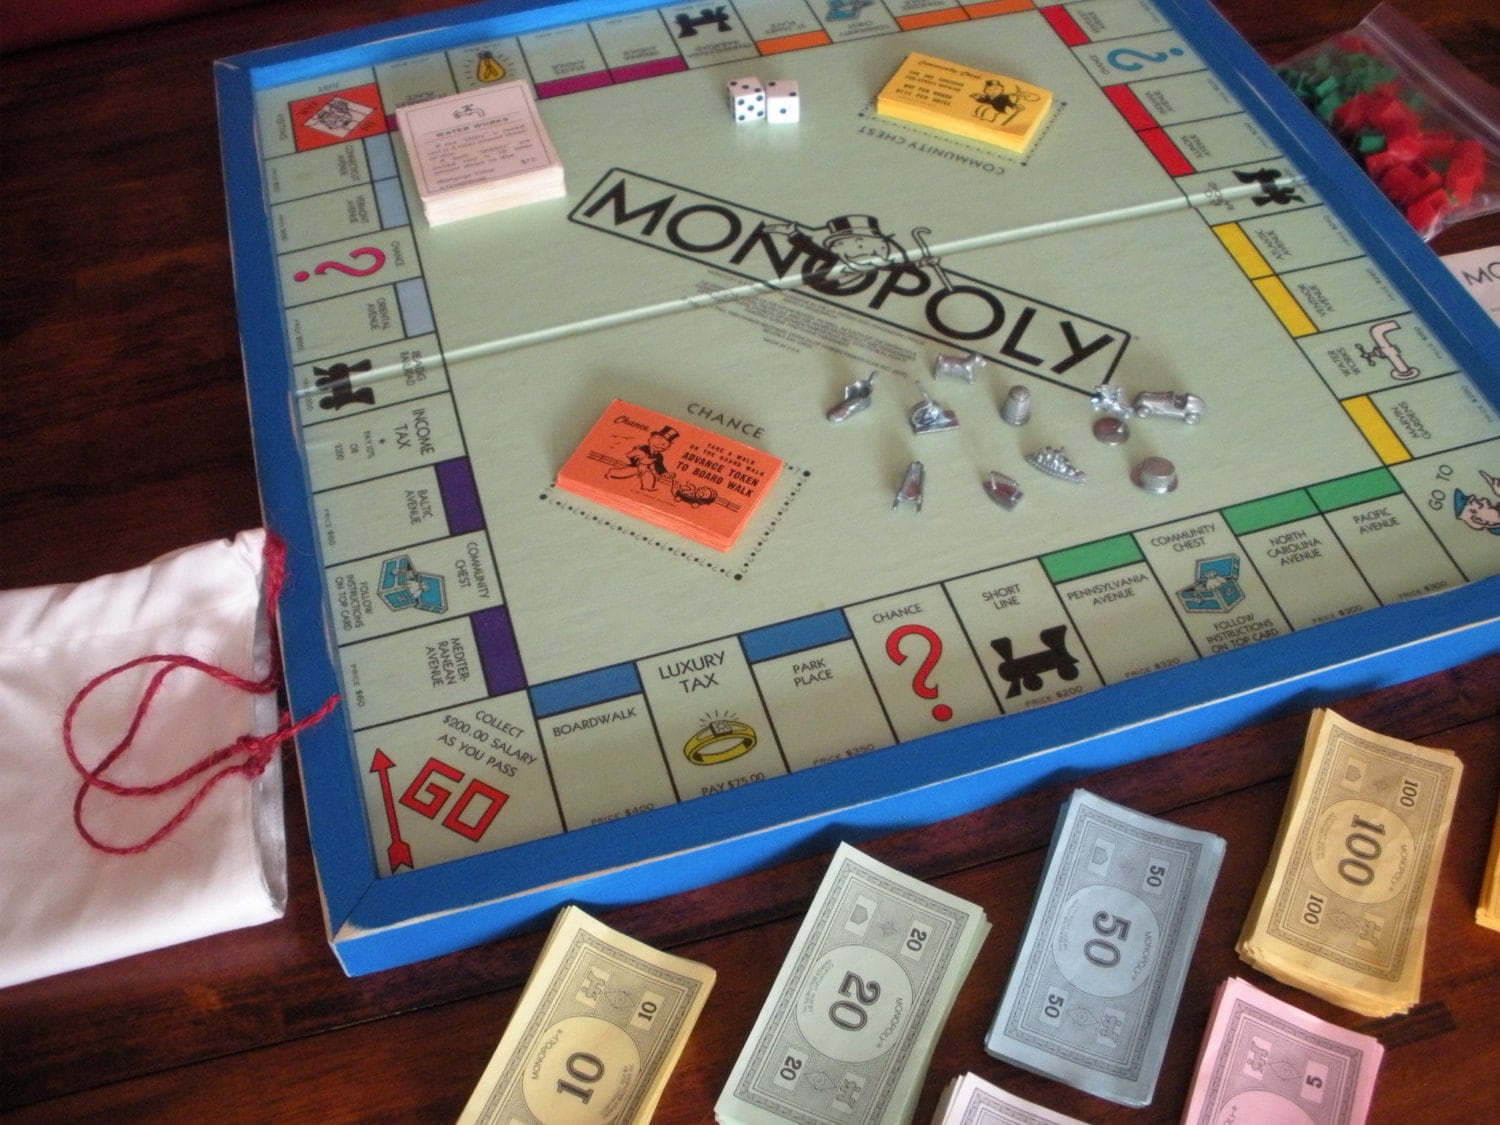 crypto monopoly board game